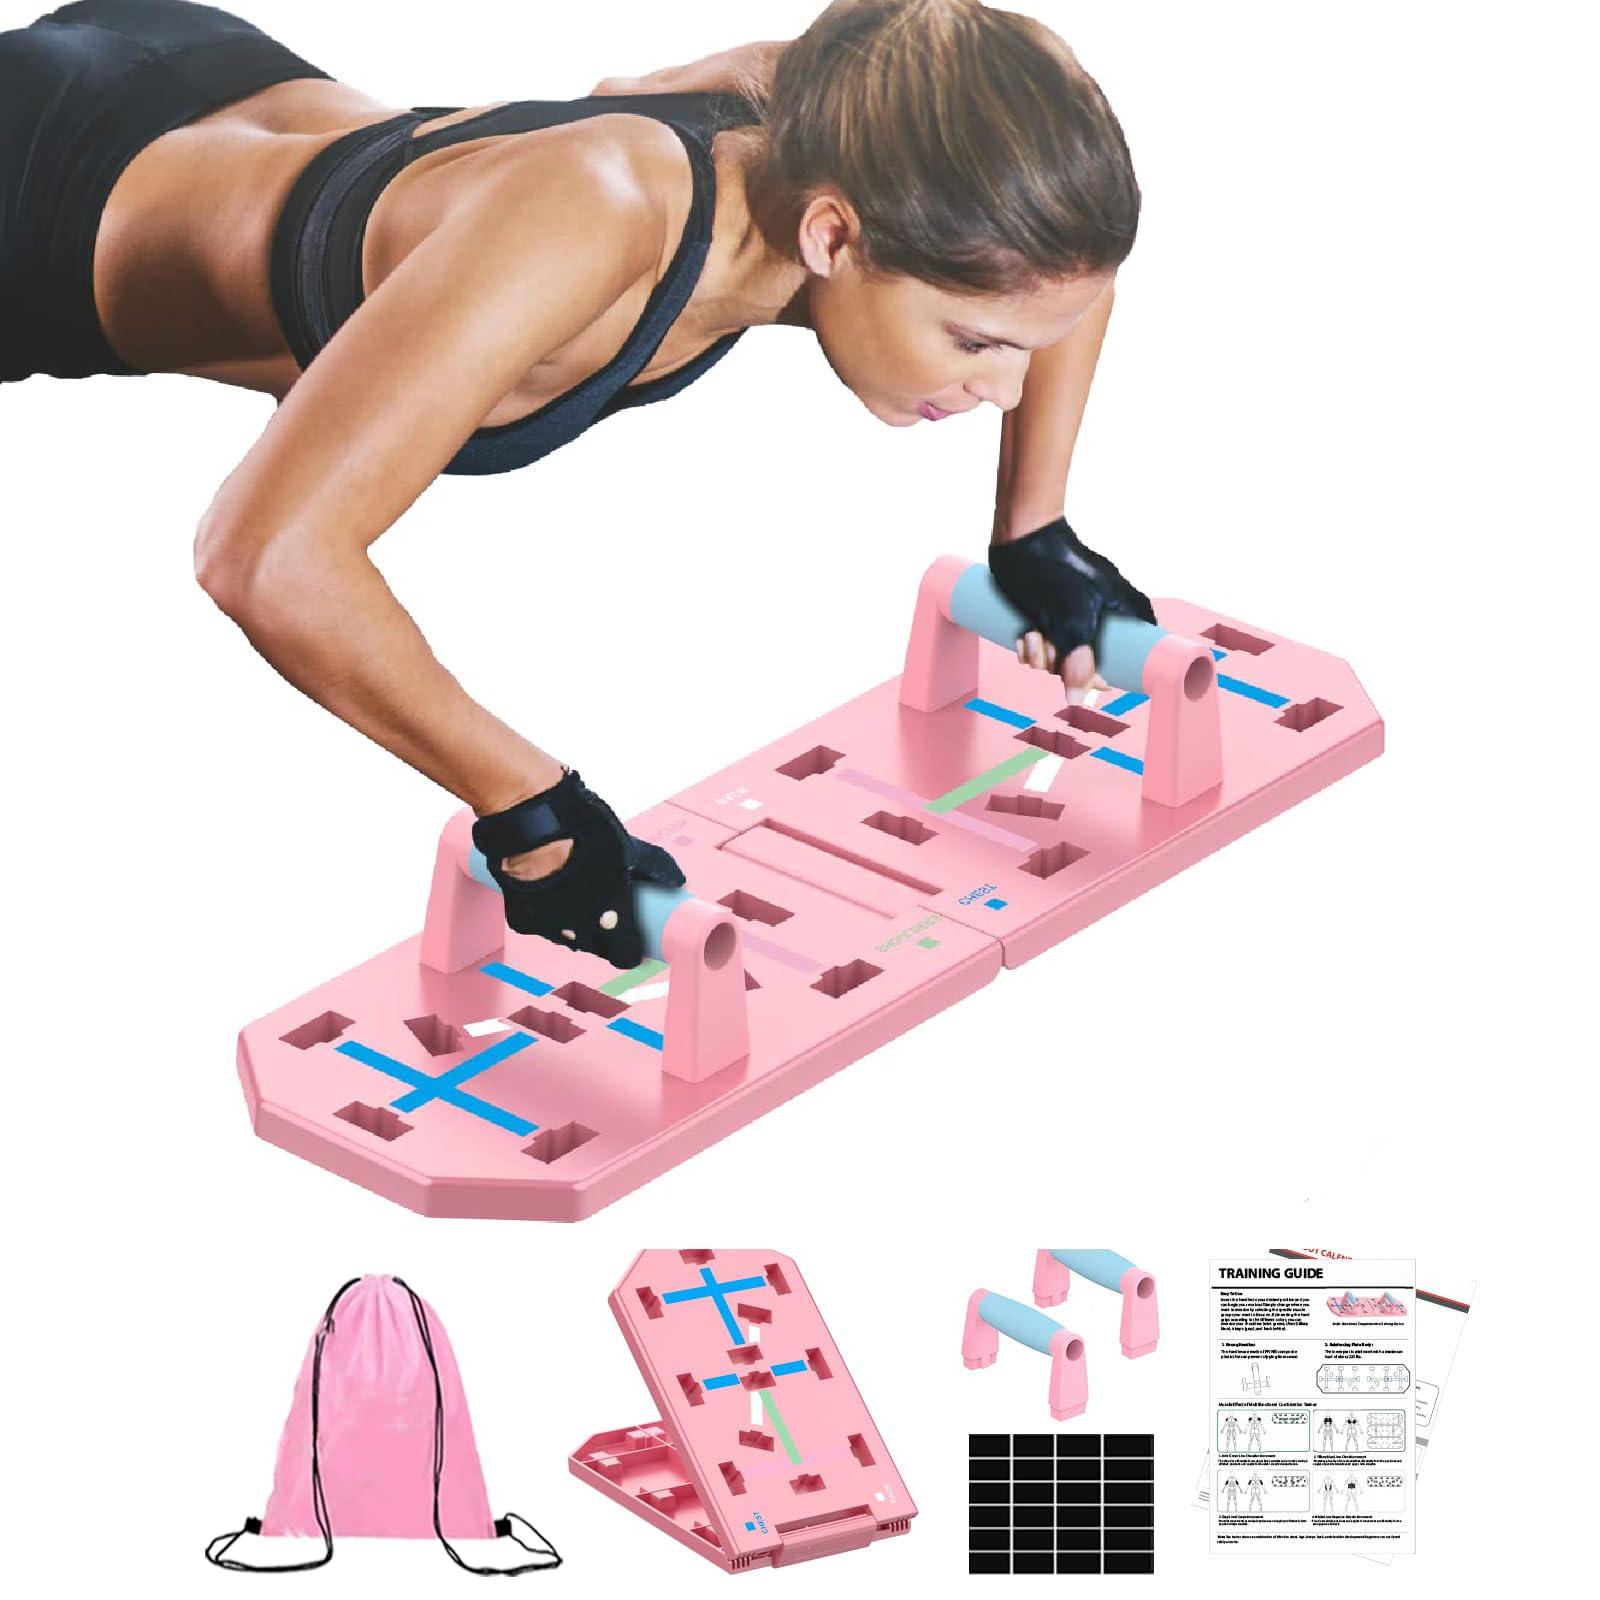 Pink Push Up Board Foldable Press Up Boards Fitness Workout Train Gym Muscle Strength Muscles Exercise Training for Men Women